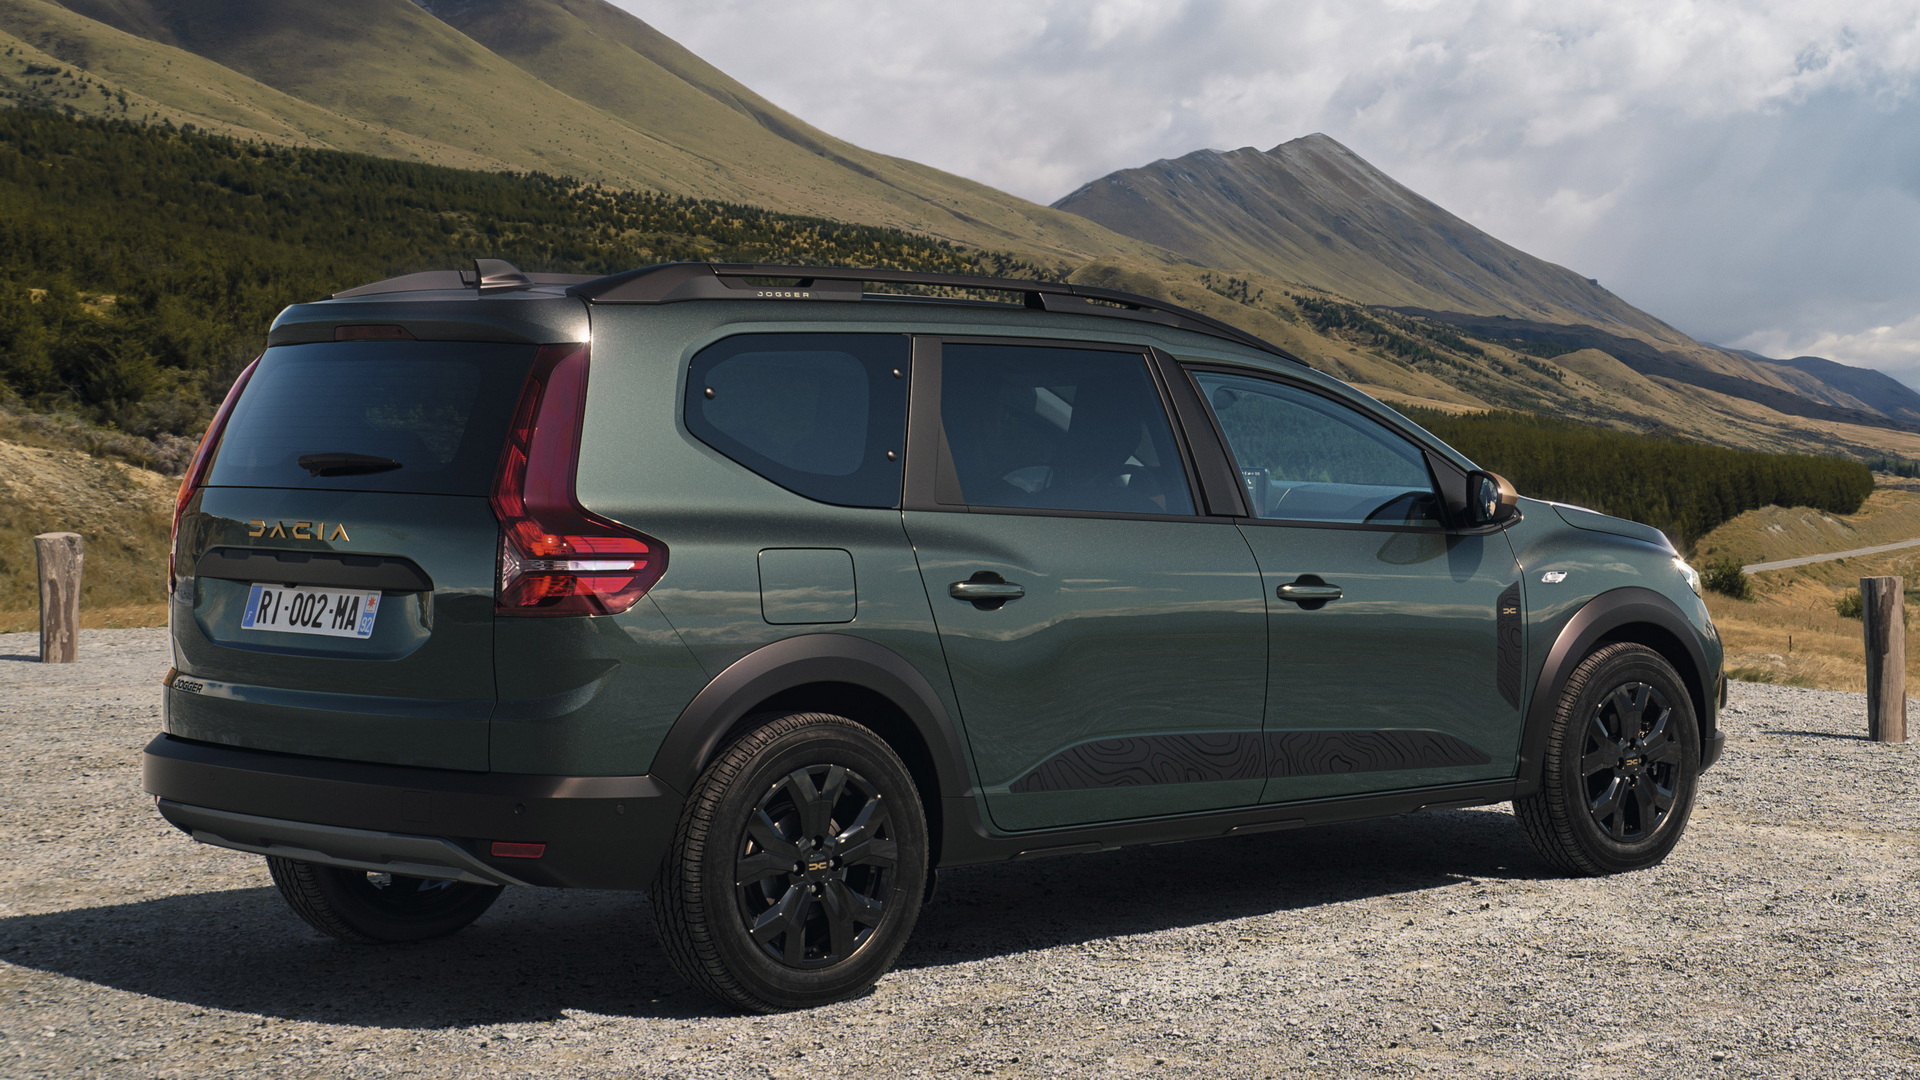 Dacia Jogger Camper Van Conversion Confirmed To Be In The Works